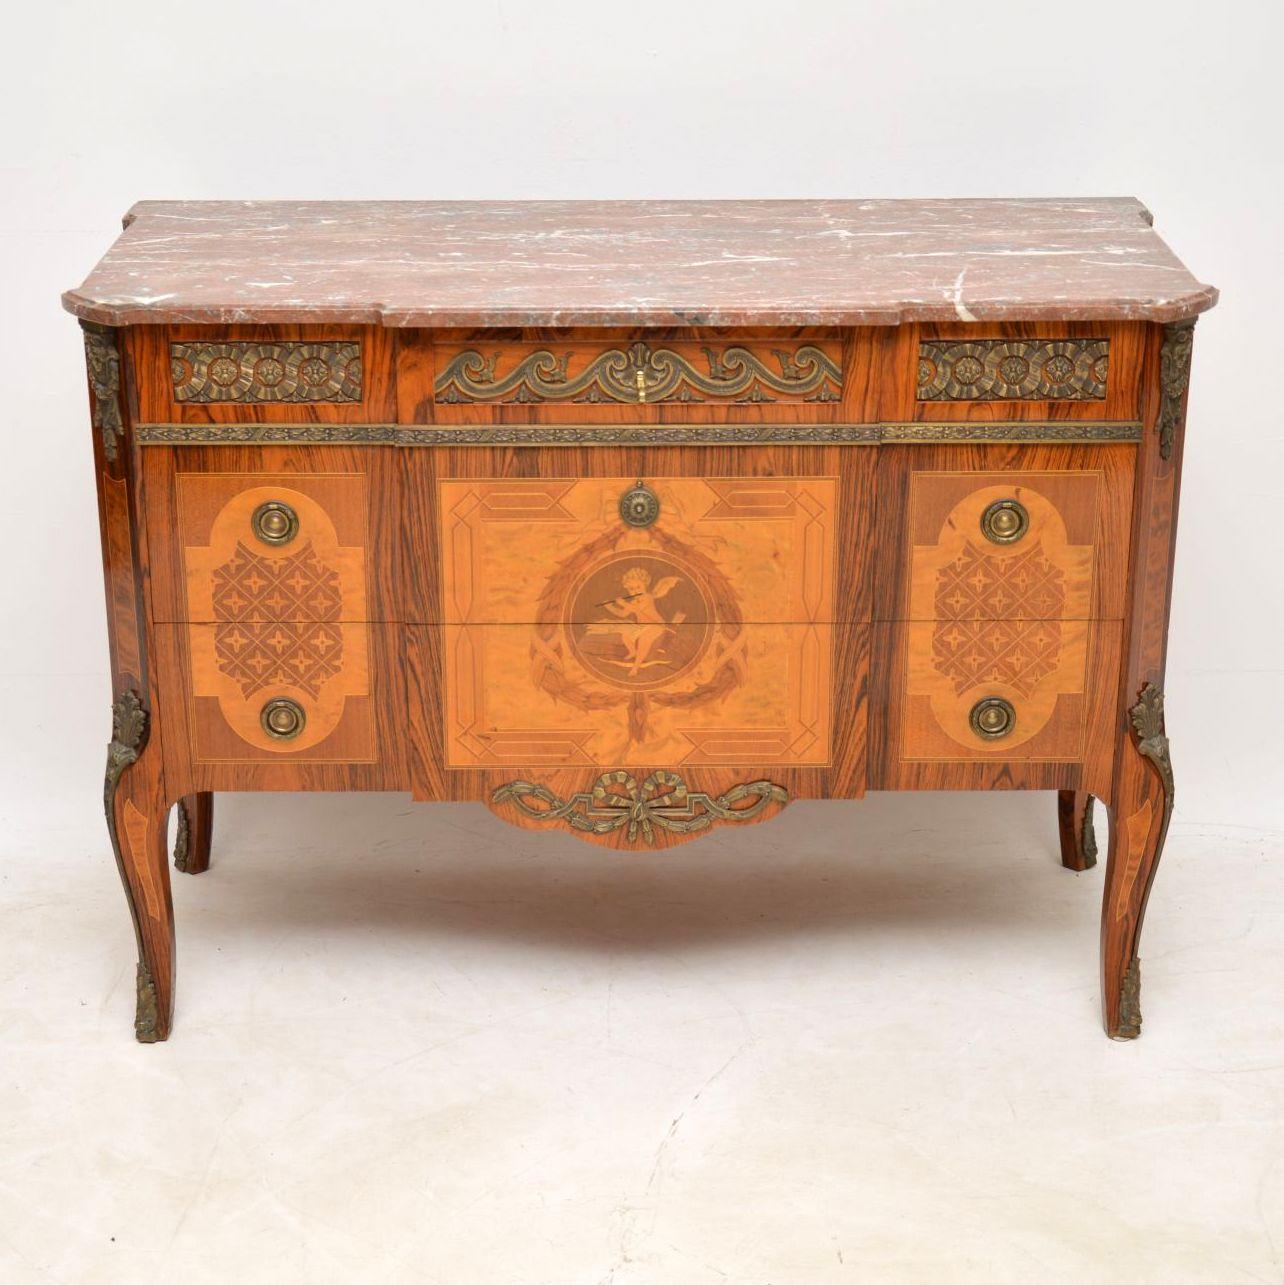 Antique Swedish marble top commode made up from many different woods, including rosewood, kingwood, satin birch, walnut and many other exotic woods within the inlays and marquetry. It’s in good condition and dates to around the 1910 period. The